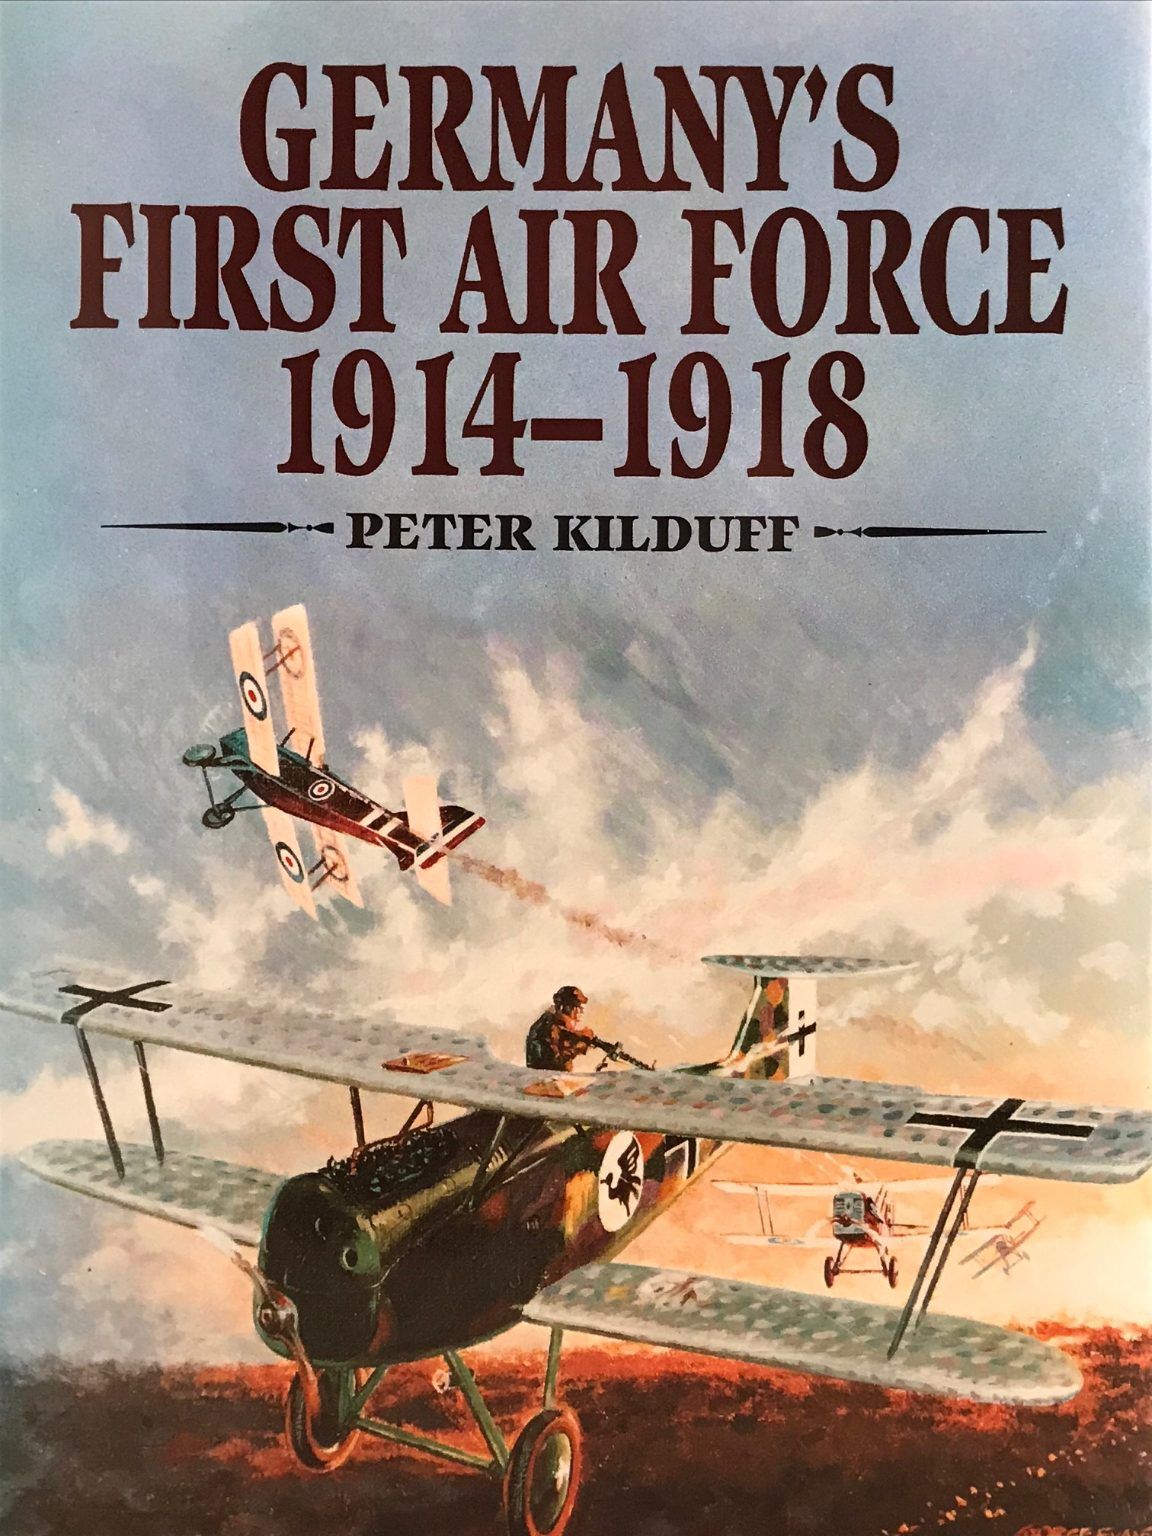 GERMANY'S FIRST AIR FORCE 1914-1918